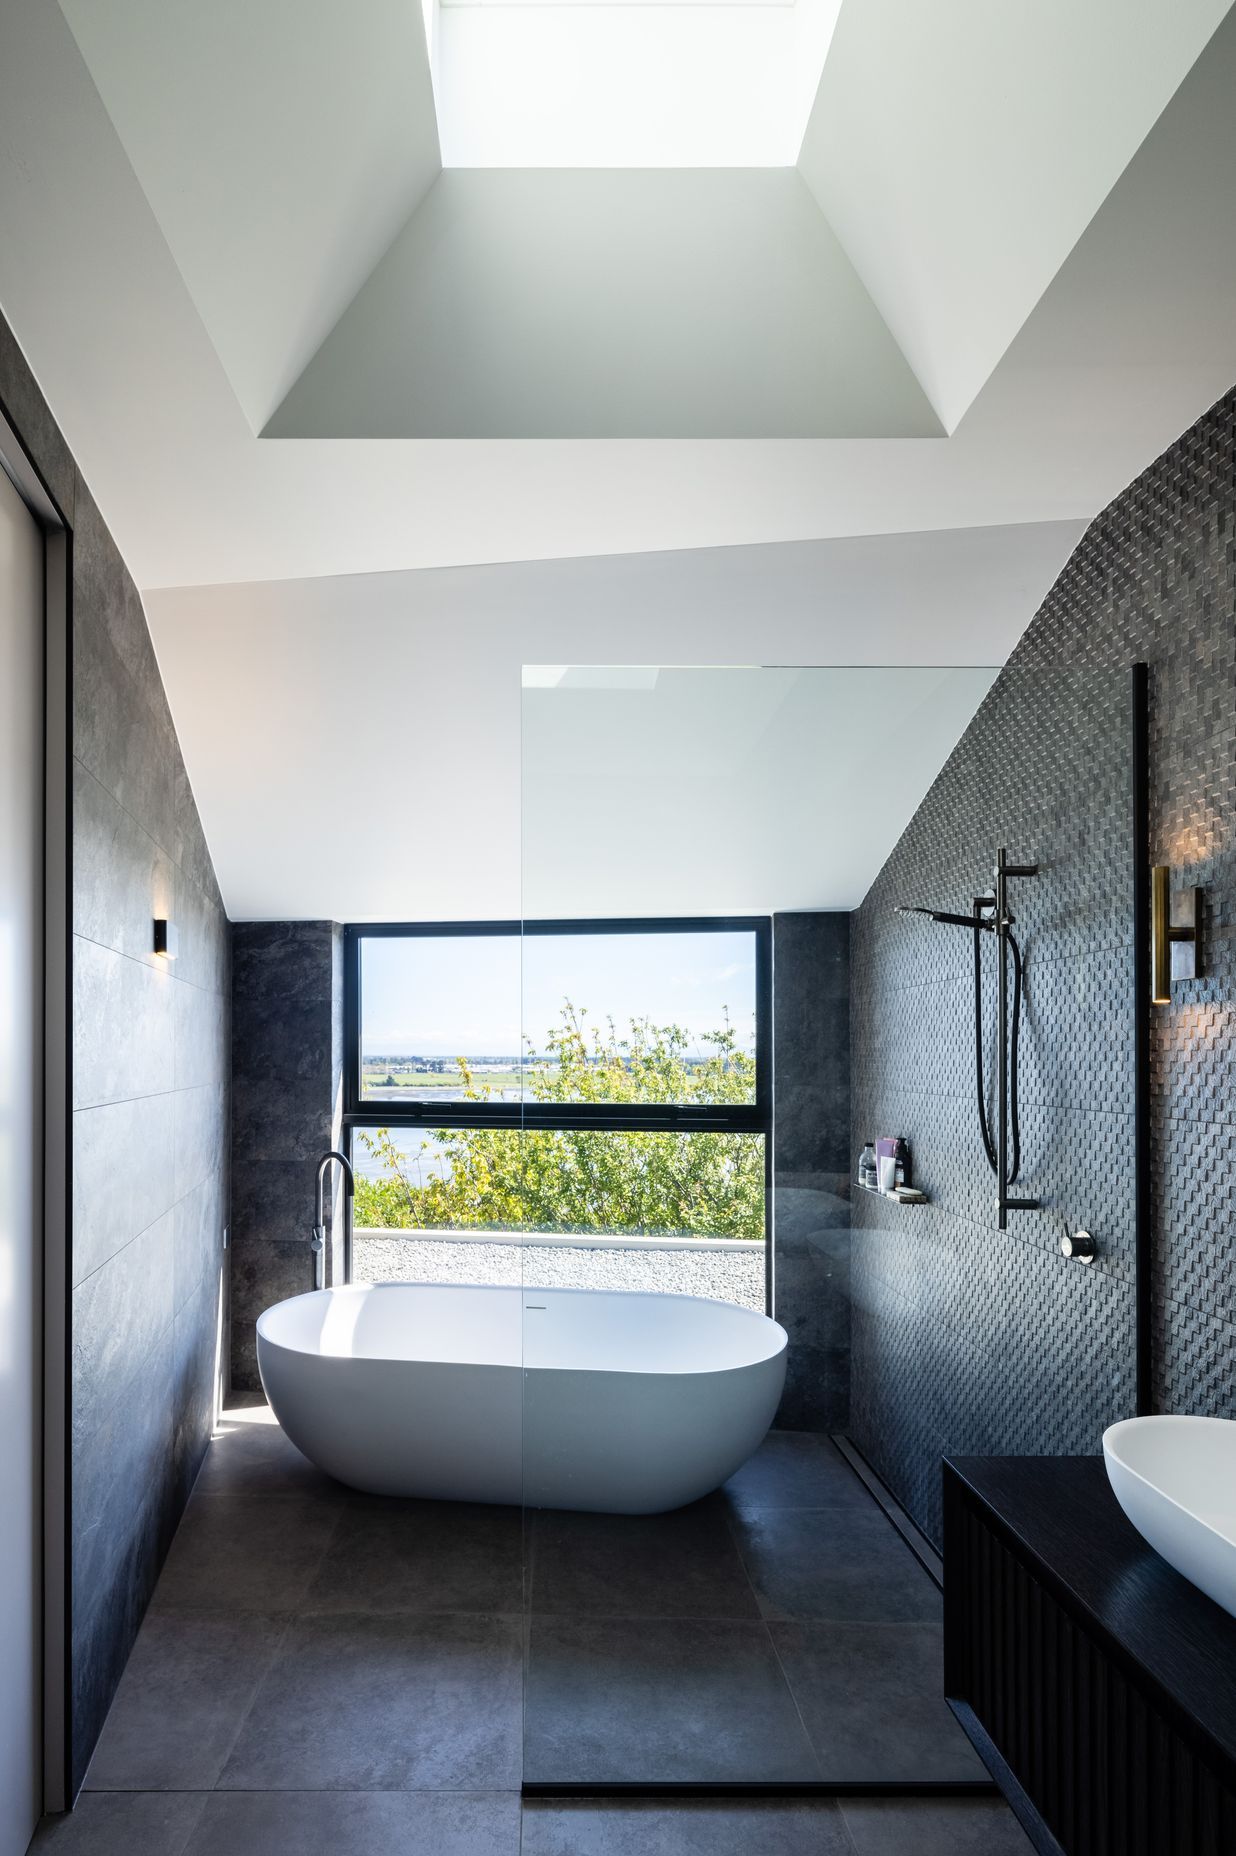 The master en suite bath and shower enjoy a dramatic view.